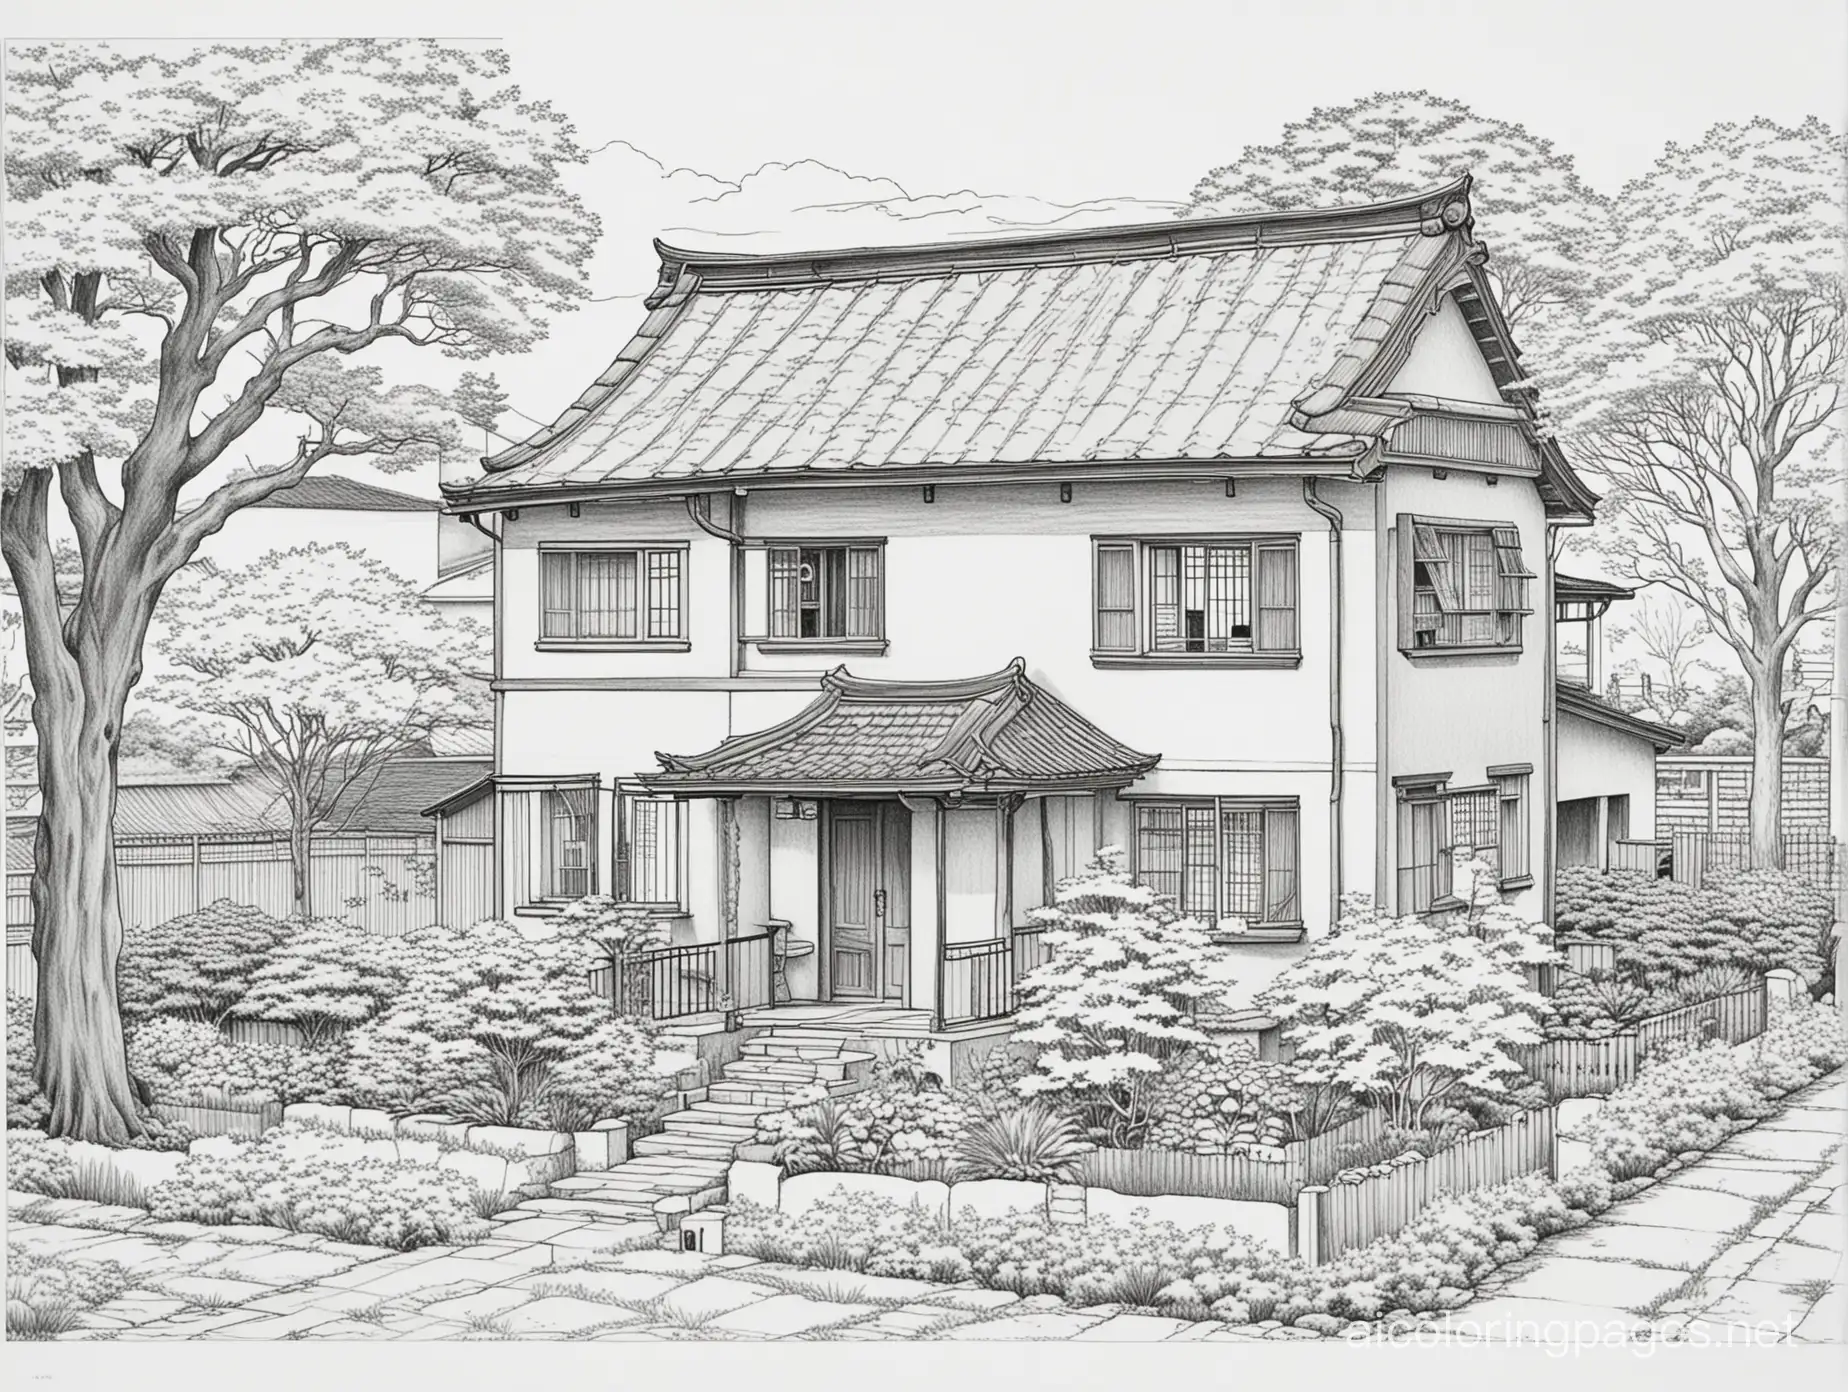 Showa era house, landscape, Coloring Page, black and white, line art, white background, Simplicity, Ample White Space. The background of the coloring page is plain white to make it easy for young children to color within the lines. The outlines of all the subjects are easy to distinguish, making it simple for kids to color without too much difficulty